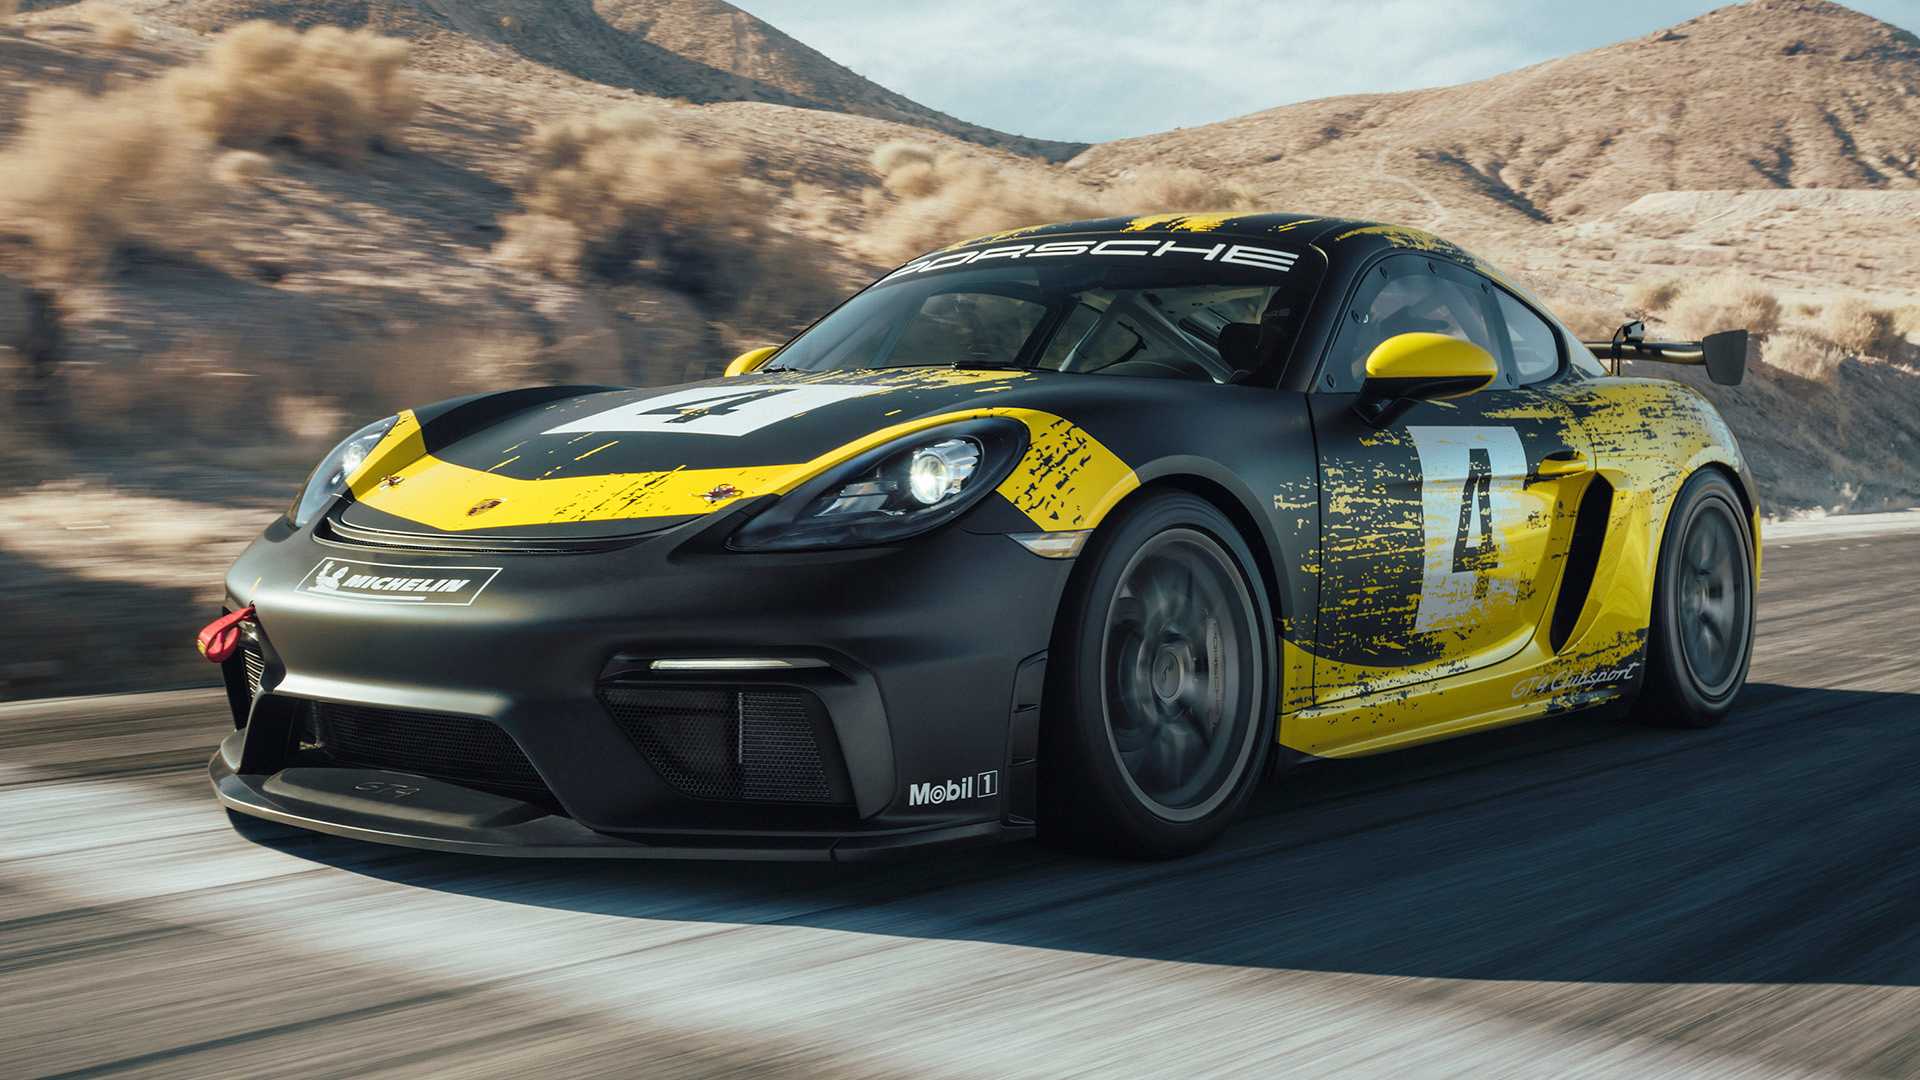 Porsche 718 Cayman GT4 Allegedly Coming In July With 420 HP